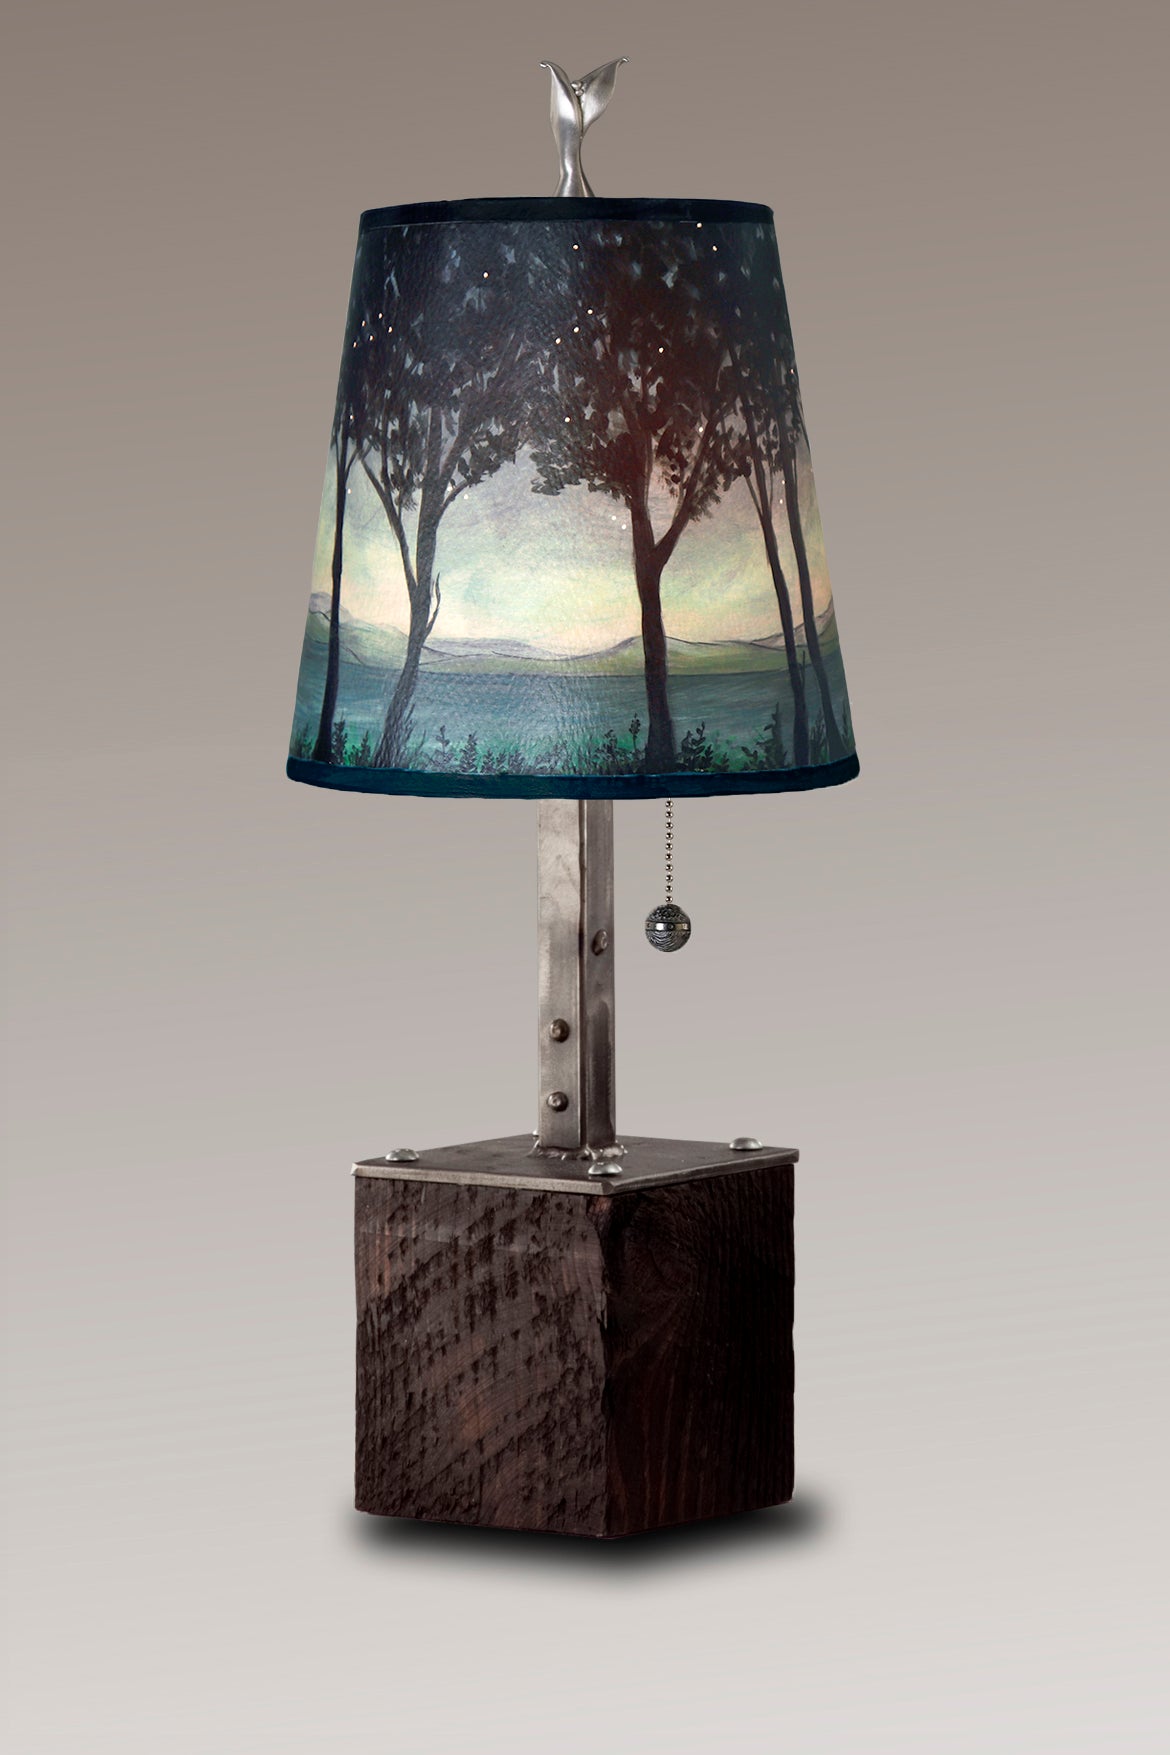 Janna Ugone & Co Table Lamps Steel Table Lamp on Reclaimed Wood with Small Drum Shade in Twilight